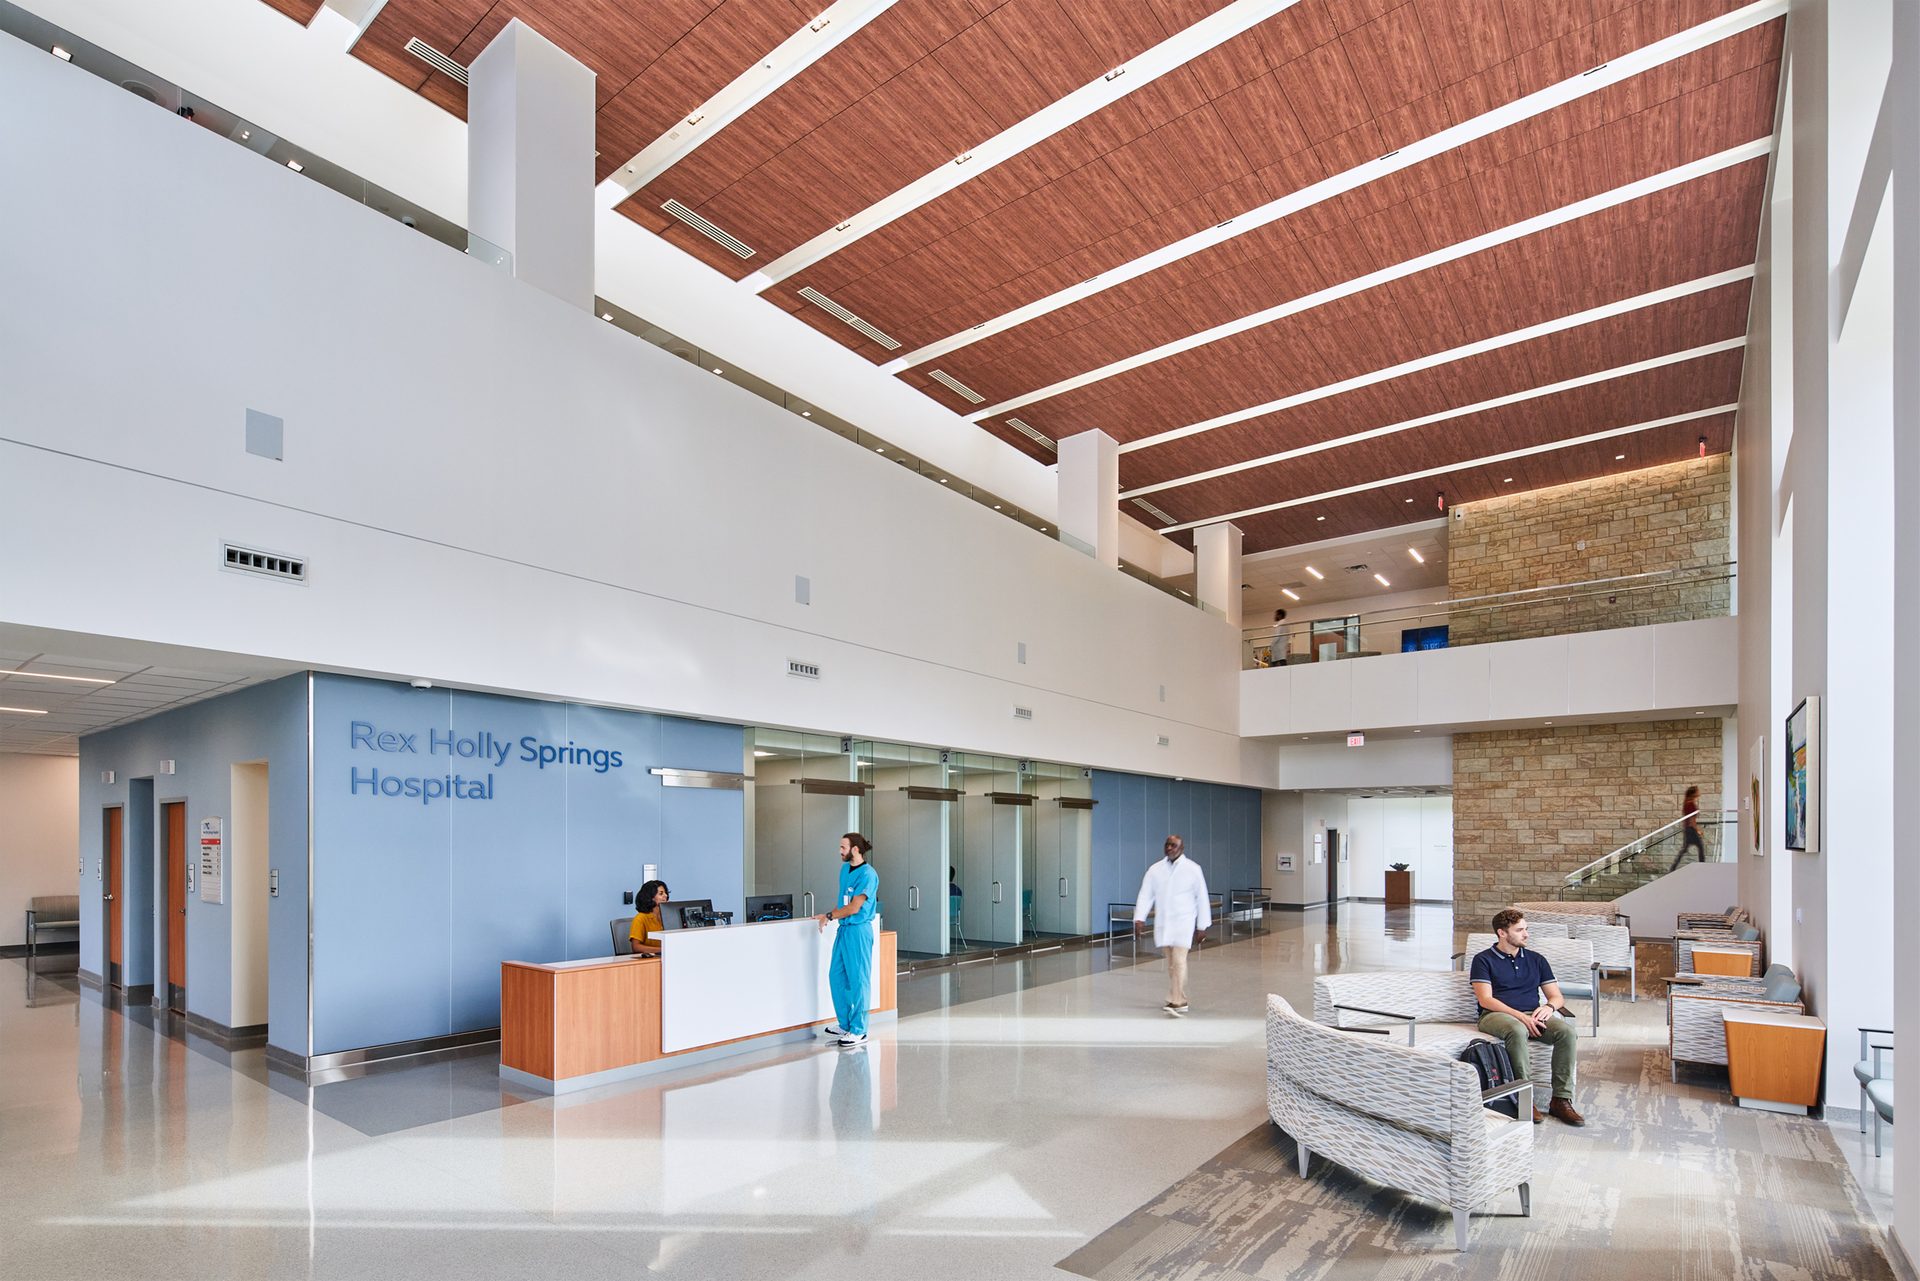 Hospital lobby interior with high wood finish ceiling system.